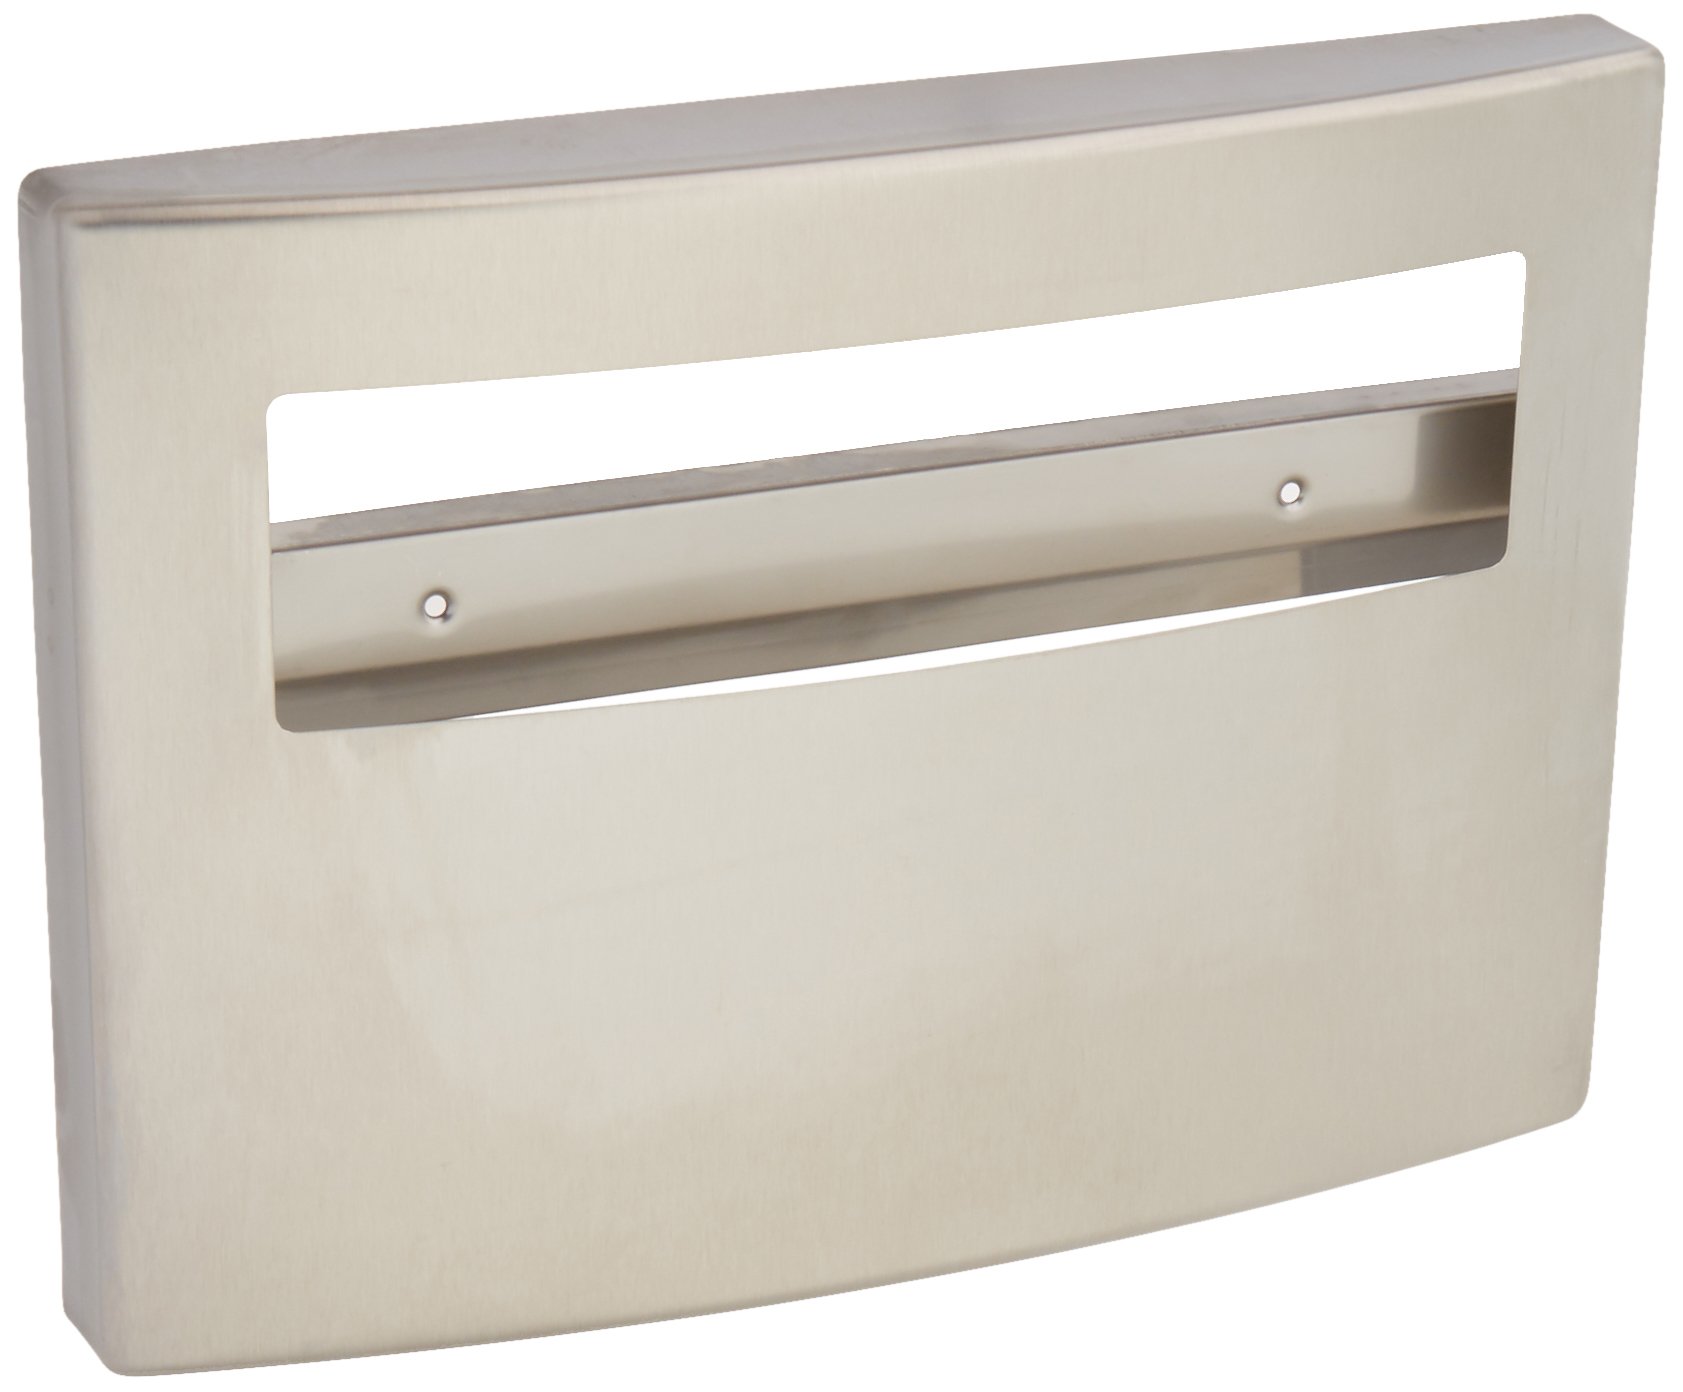 BOBRICK 4221 ConturaSeries Stainless Steel Surface-Mounted Toilet Seat-Cover Dispenser, Satin Finish, 2